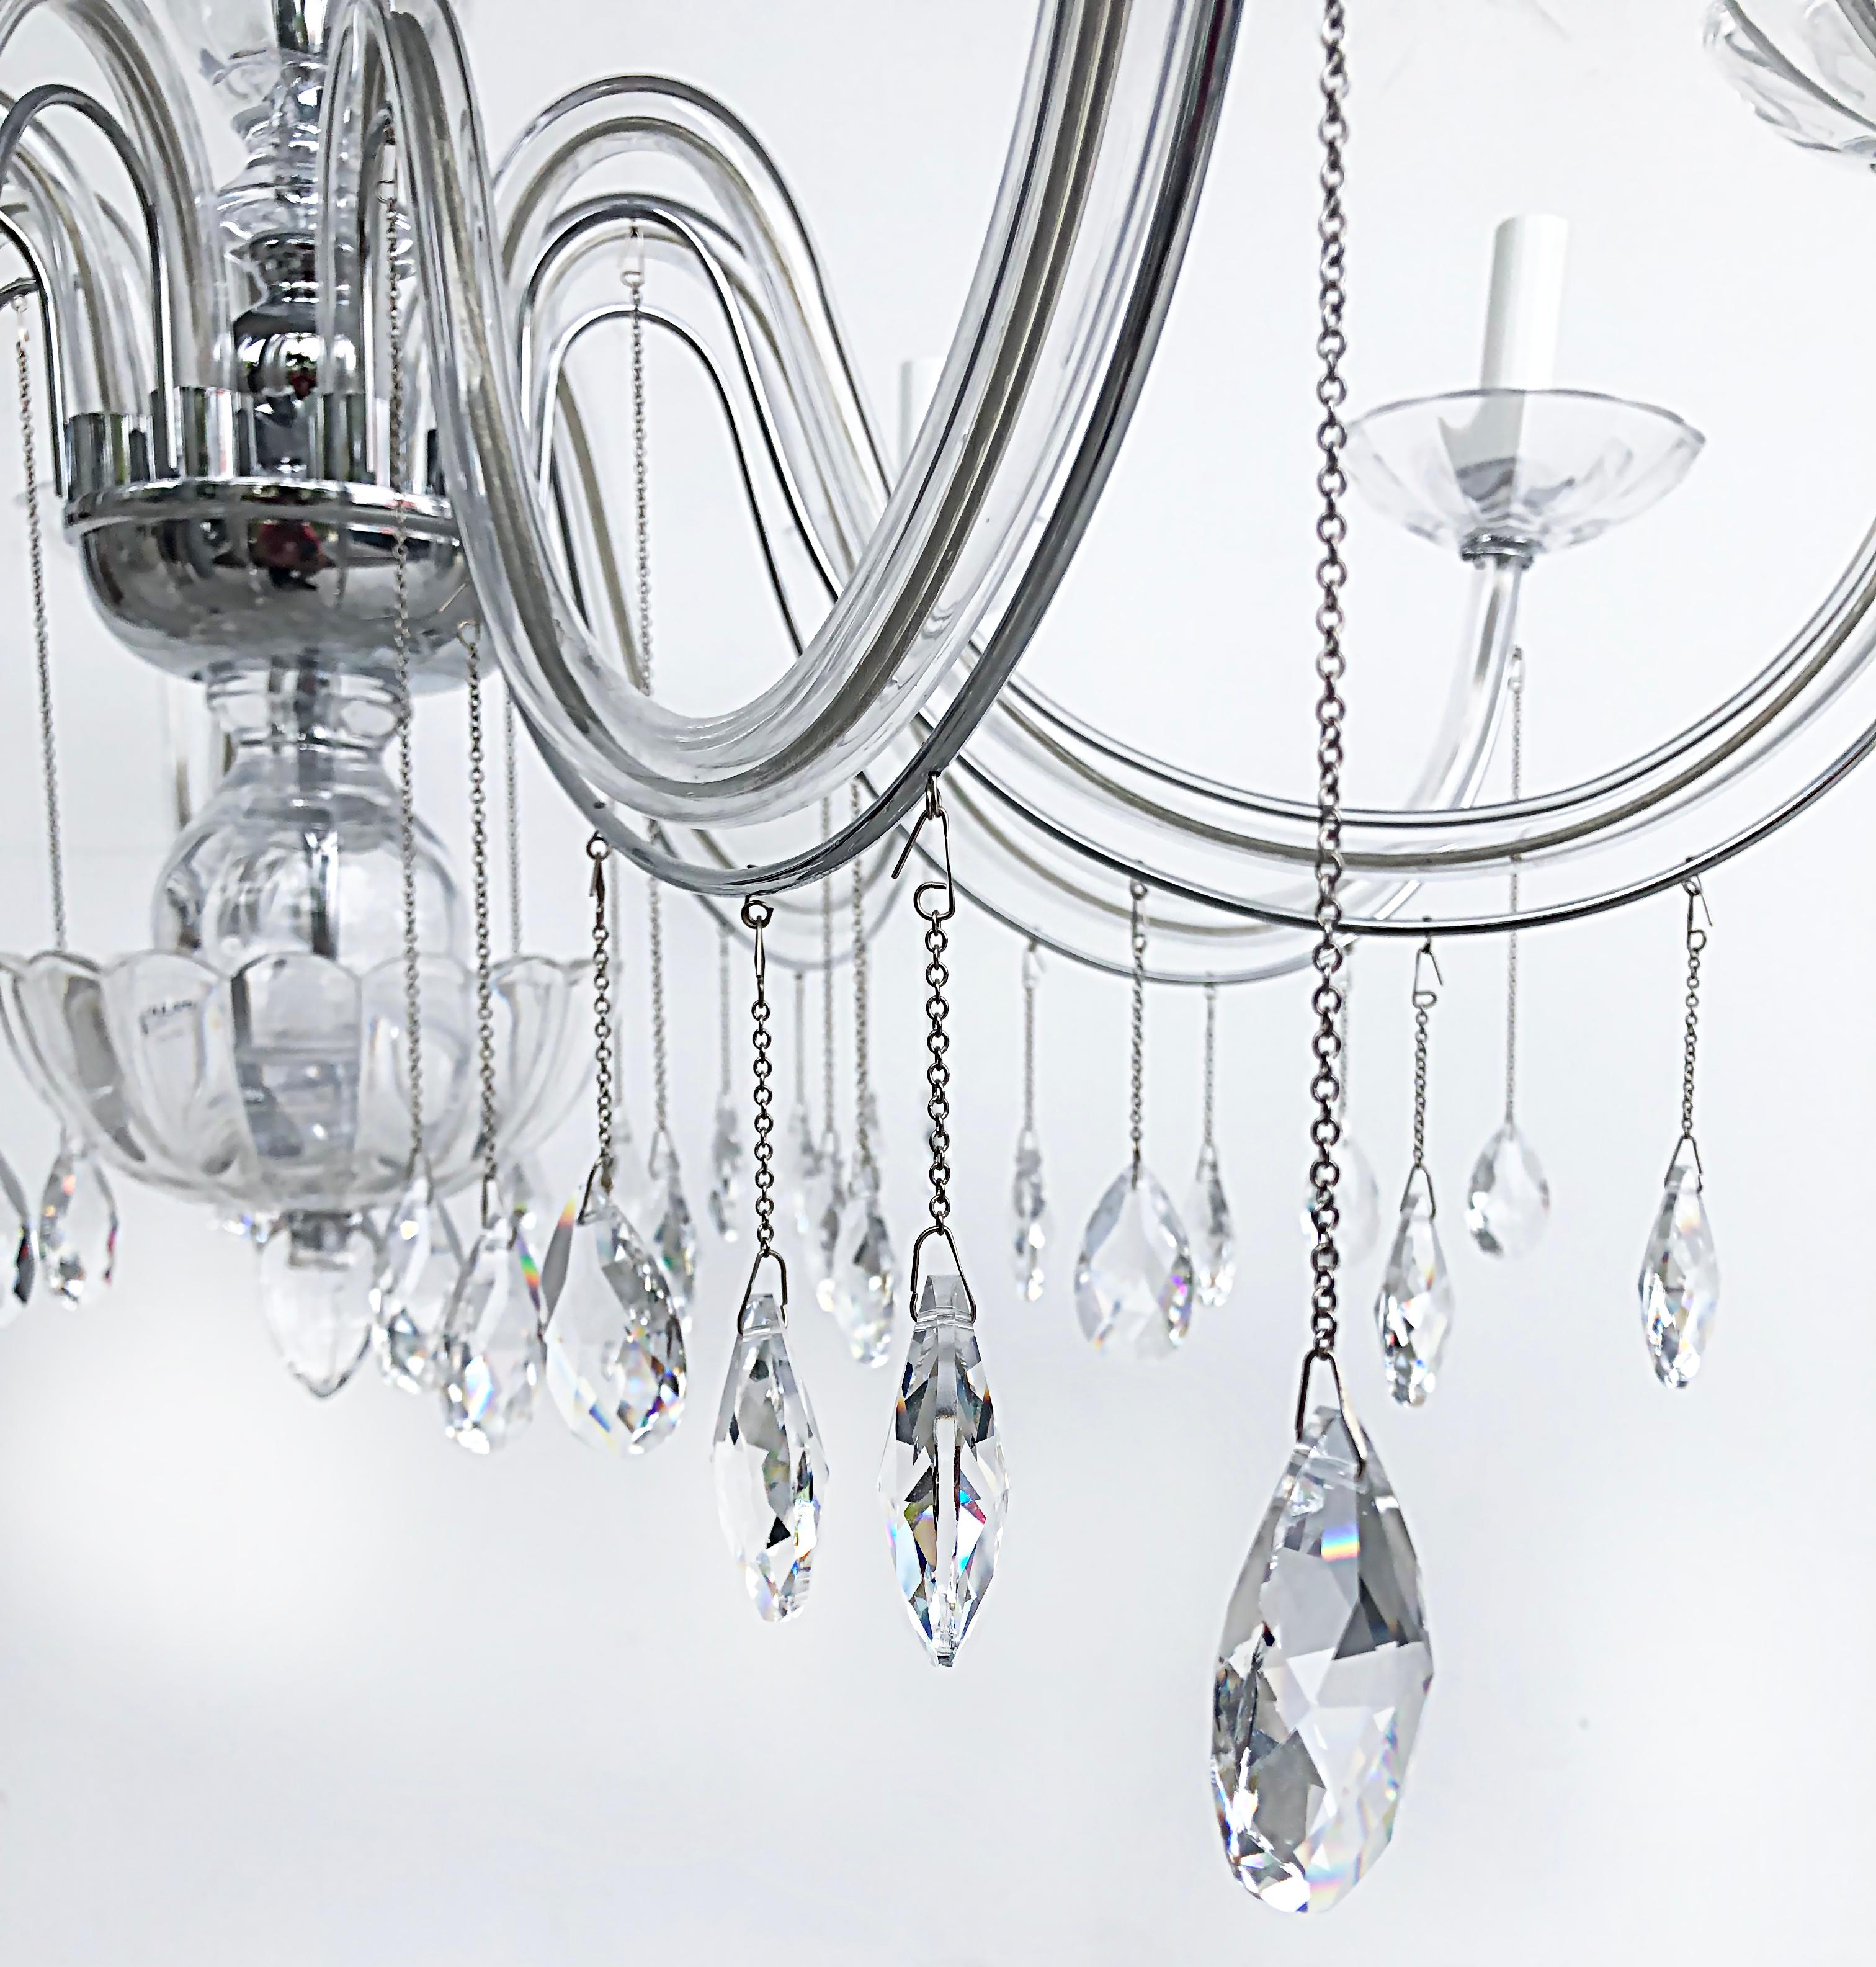 Metal 8-Arm Chandelier with Crystal Glass Drops, Chain and Canopy, Wired & Working For Sale